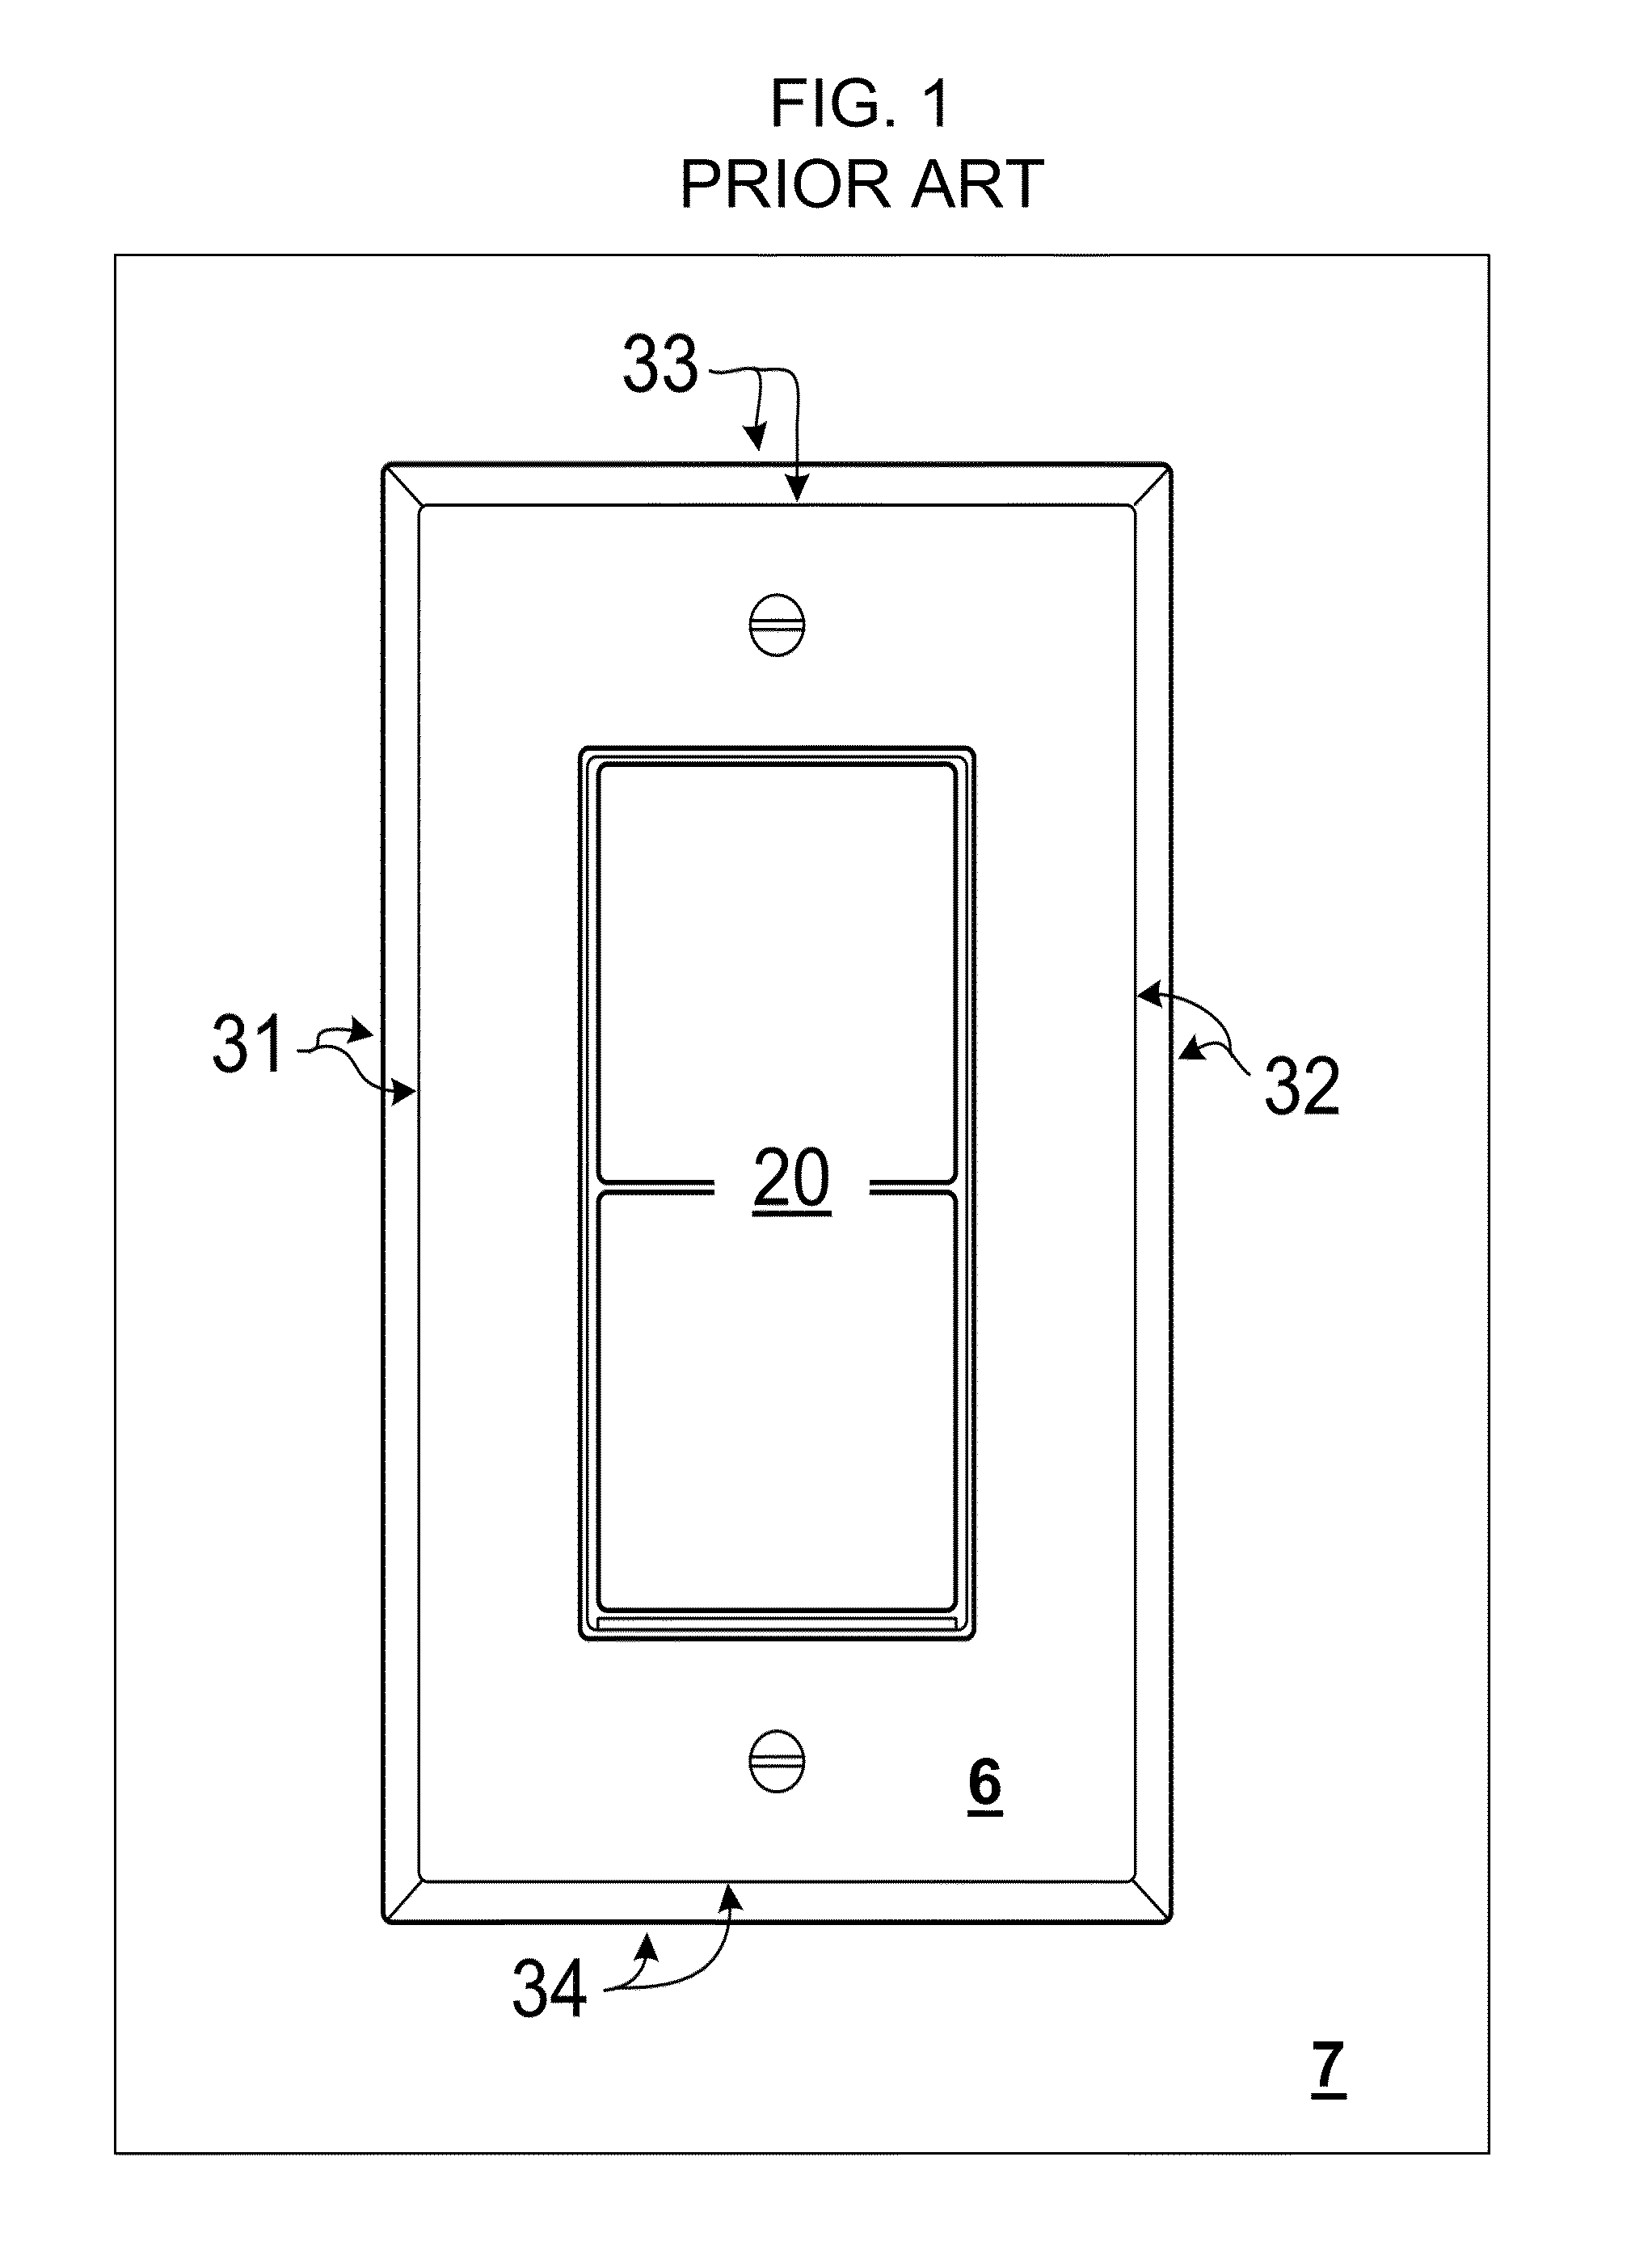 Wall-mounted electrical device with modular antenna bezel frame